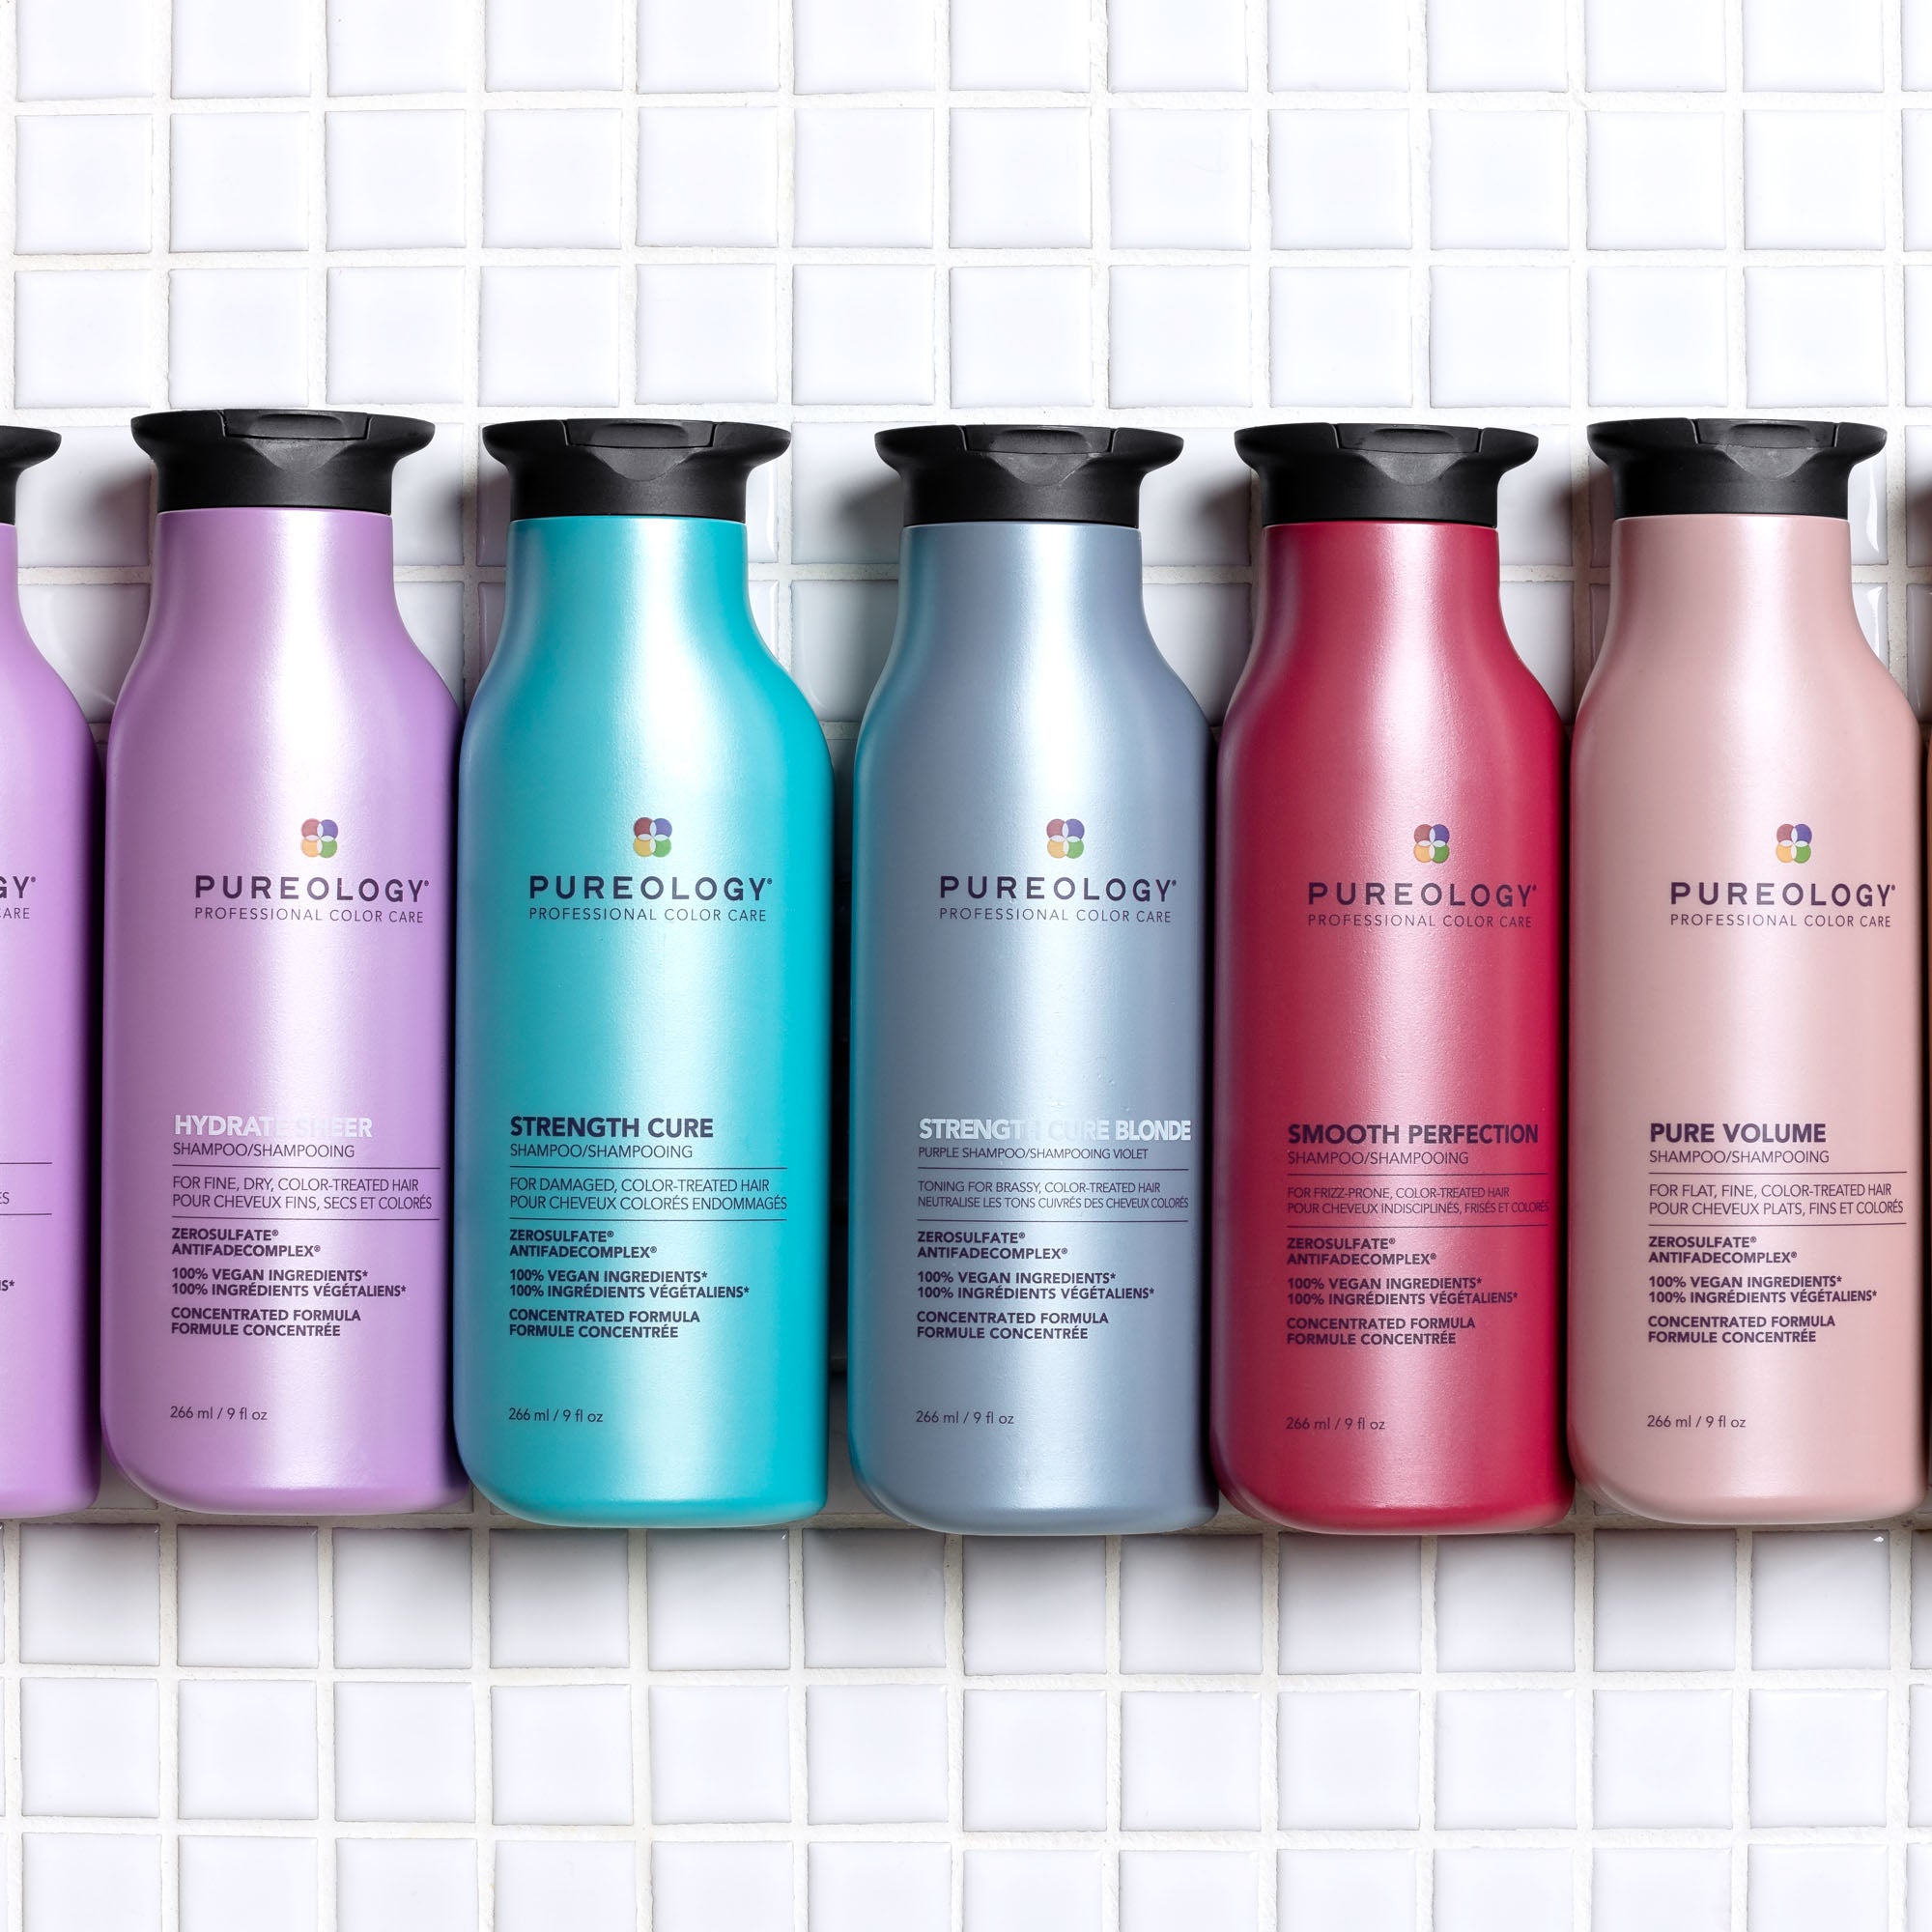 Pureology sulphate-free hair products